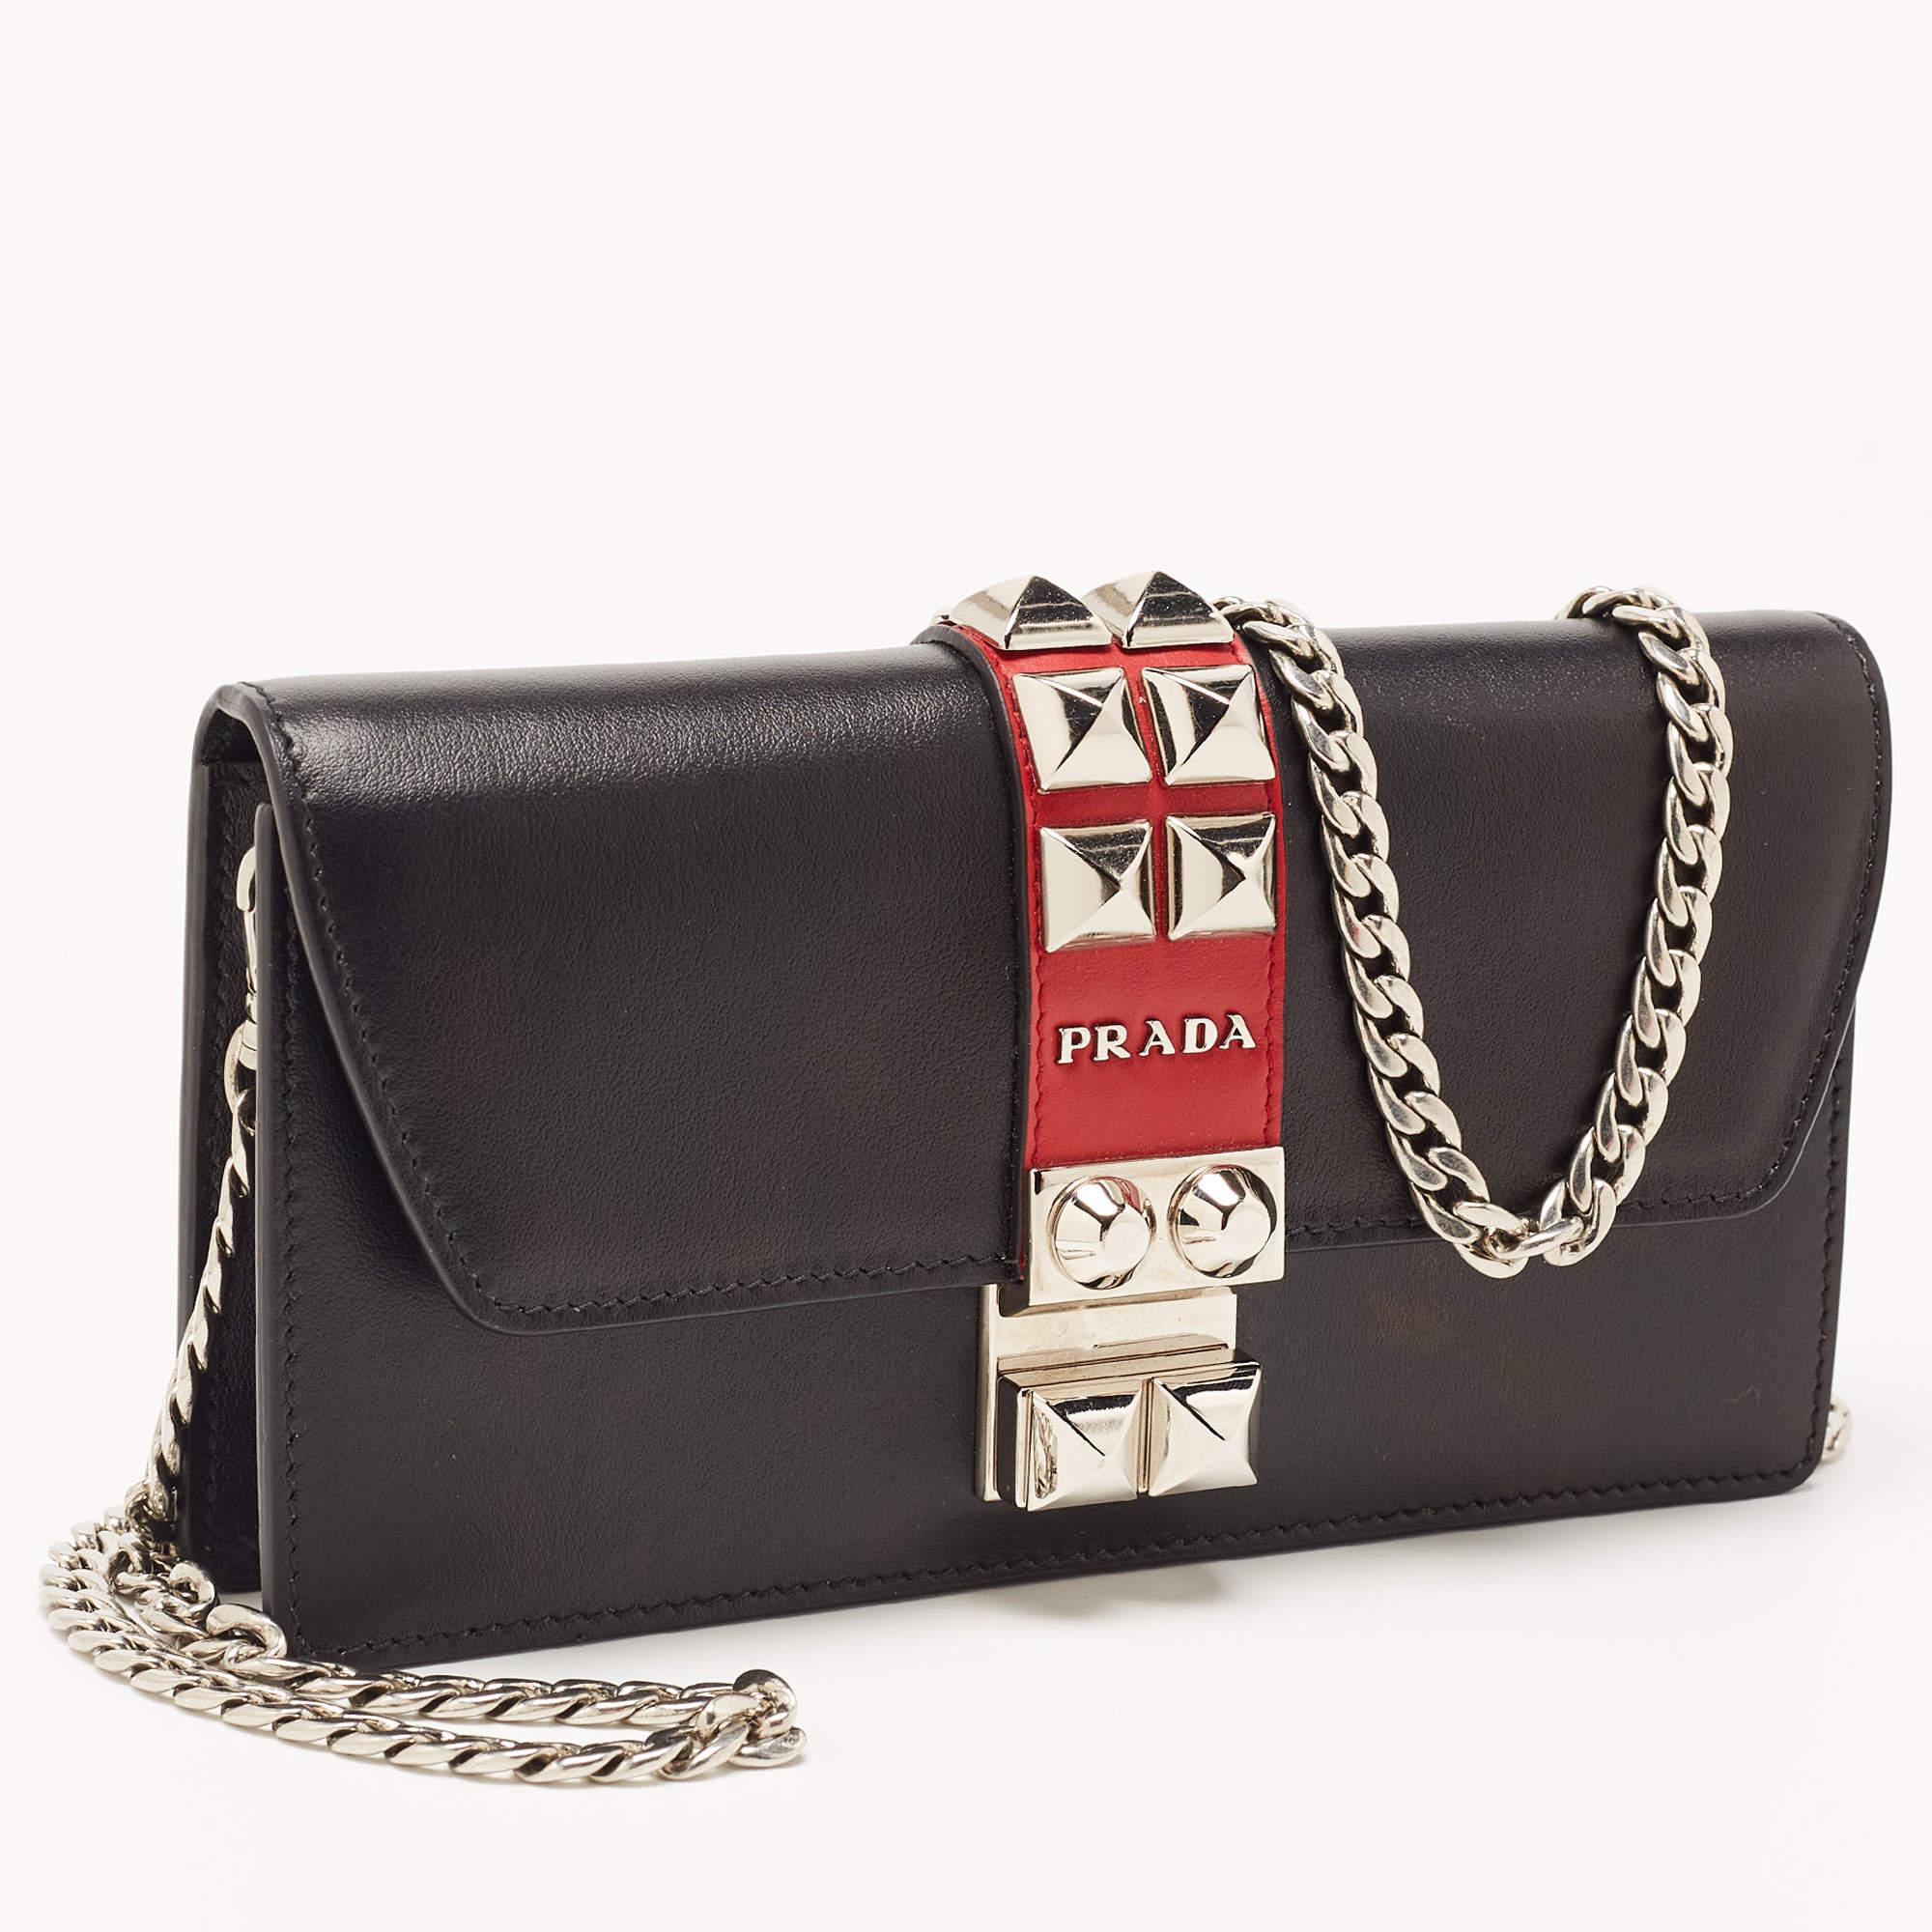 This wallet on chain is conveniently designed for easy wear. It comes with a well-spaced interior for you to arrange your cards and cash neatly. This stylish piece is complete with a chain link.

Includes
Authenticity Card, Brand Dustbag, Detachable